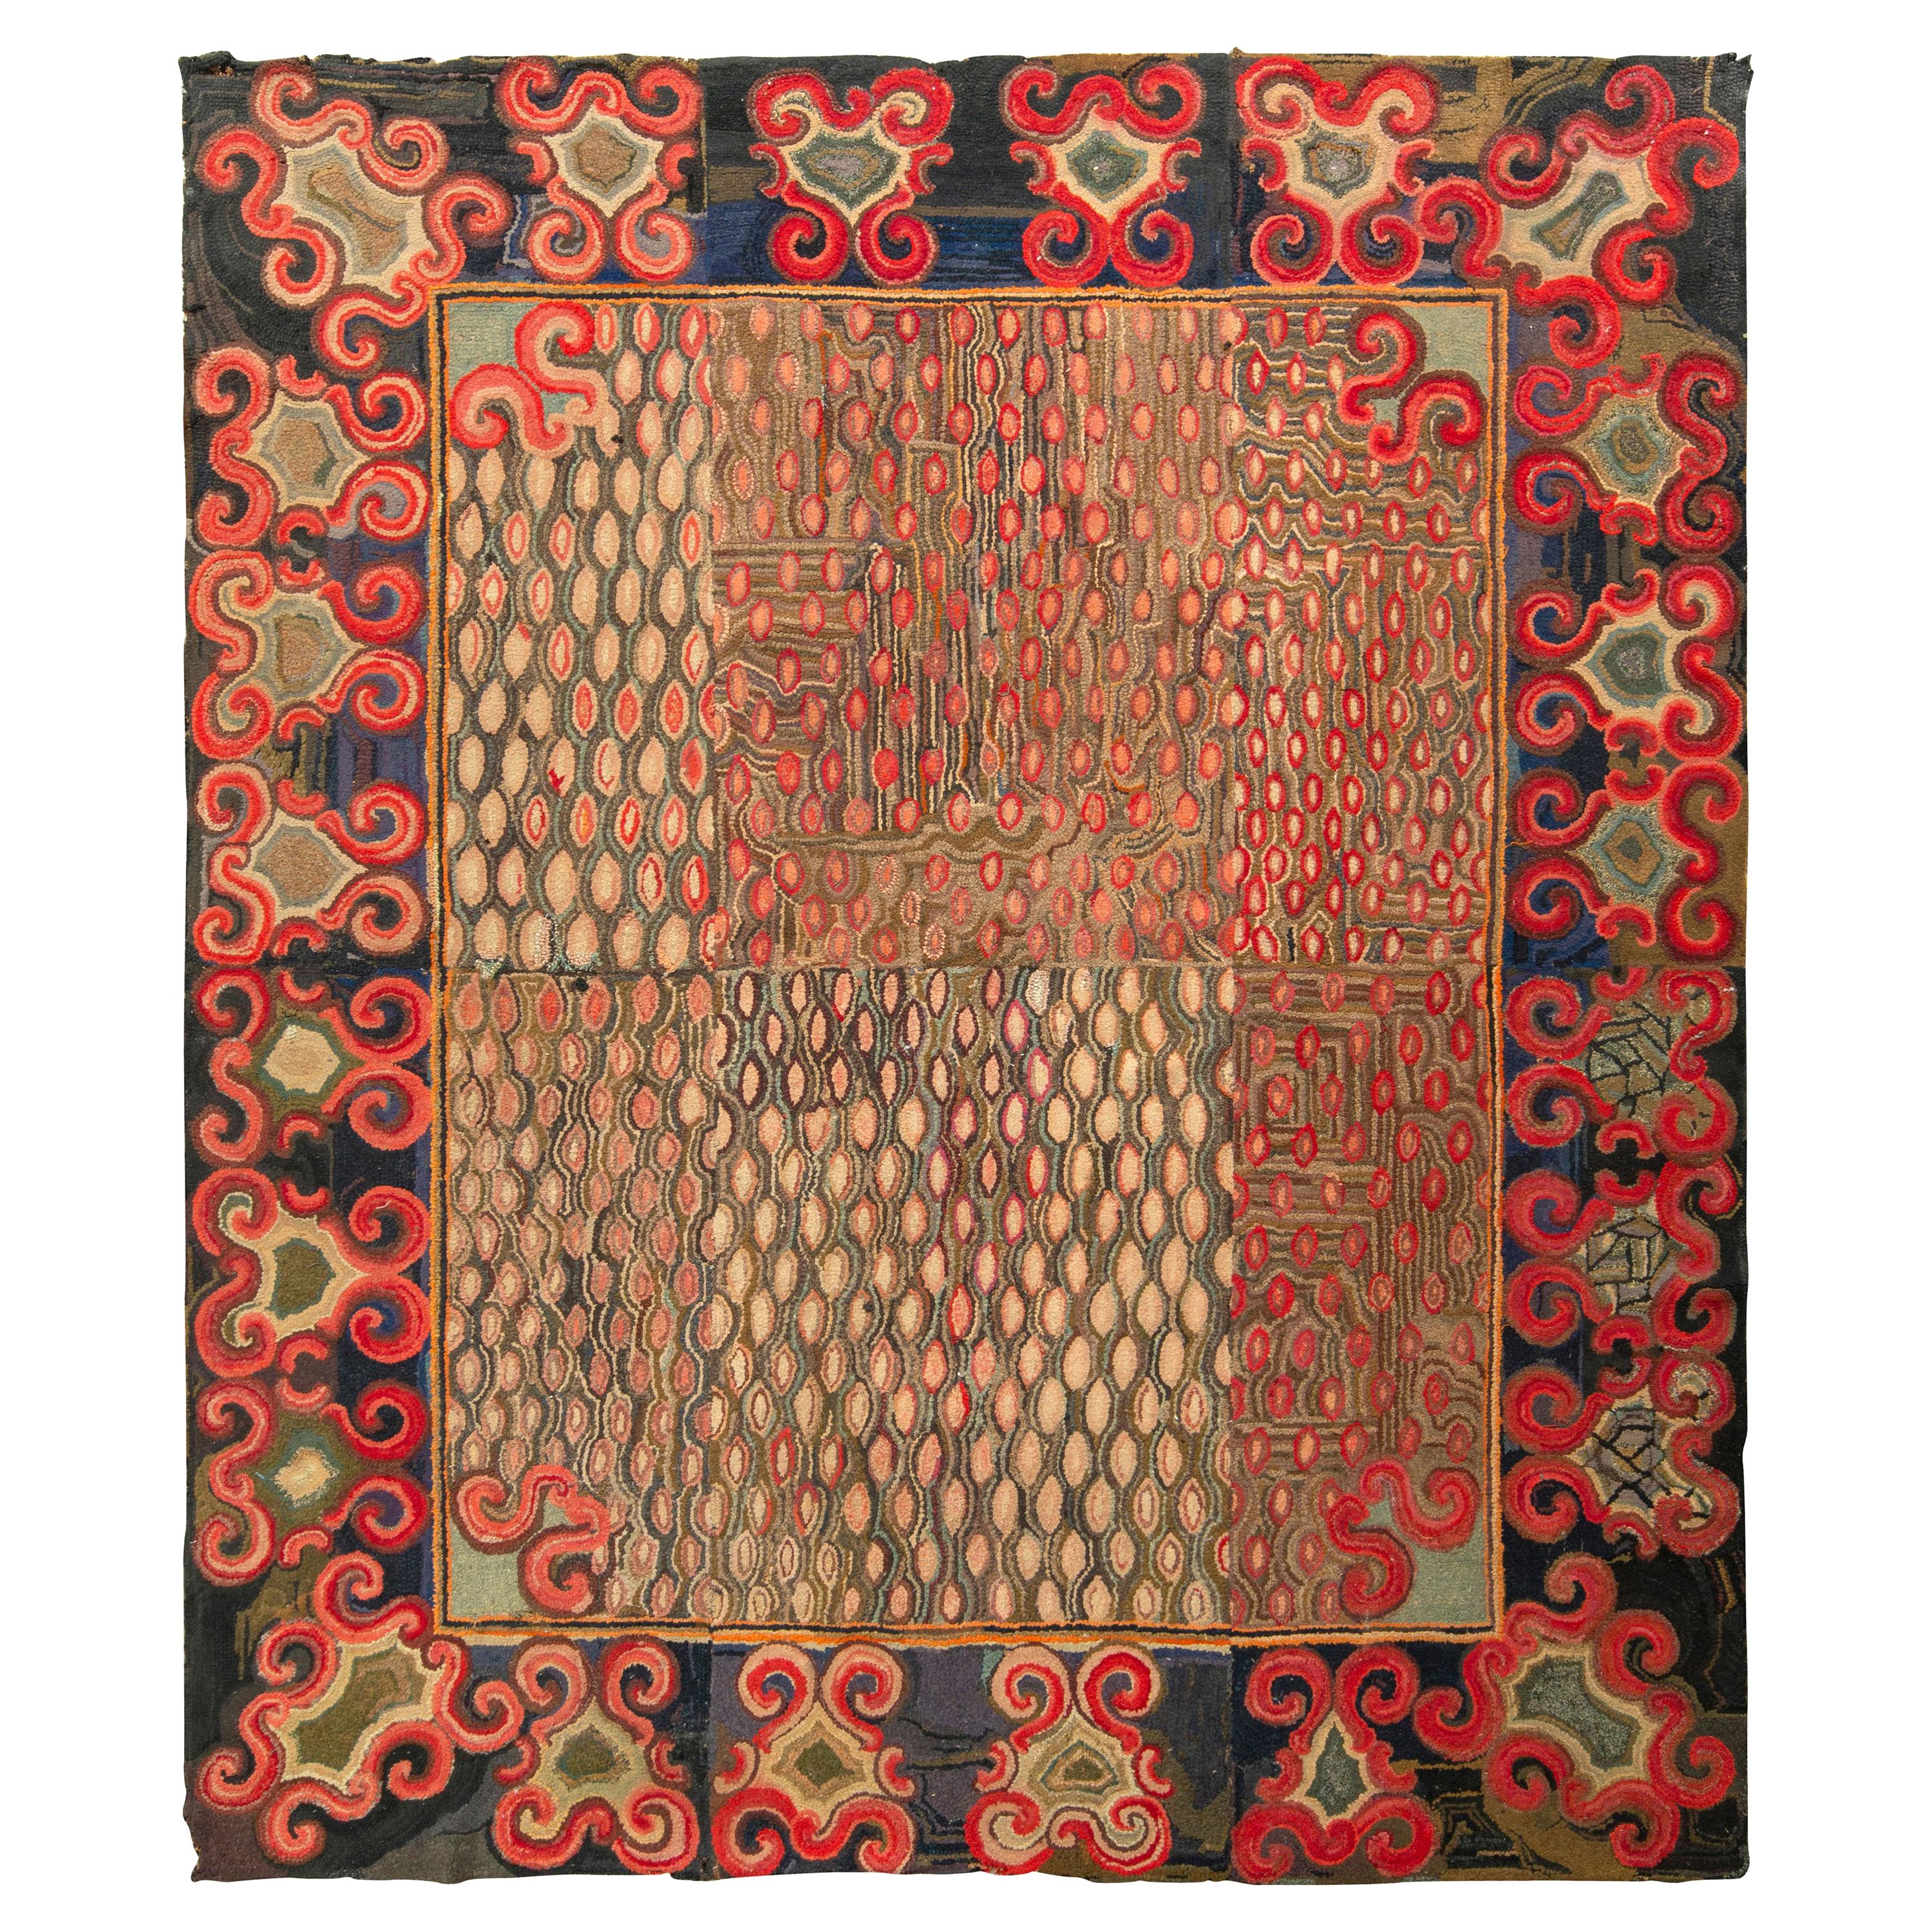 Antique Hand Rug in All over Red, Beige-Brown Geometric Pattern